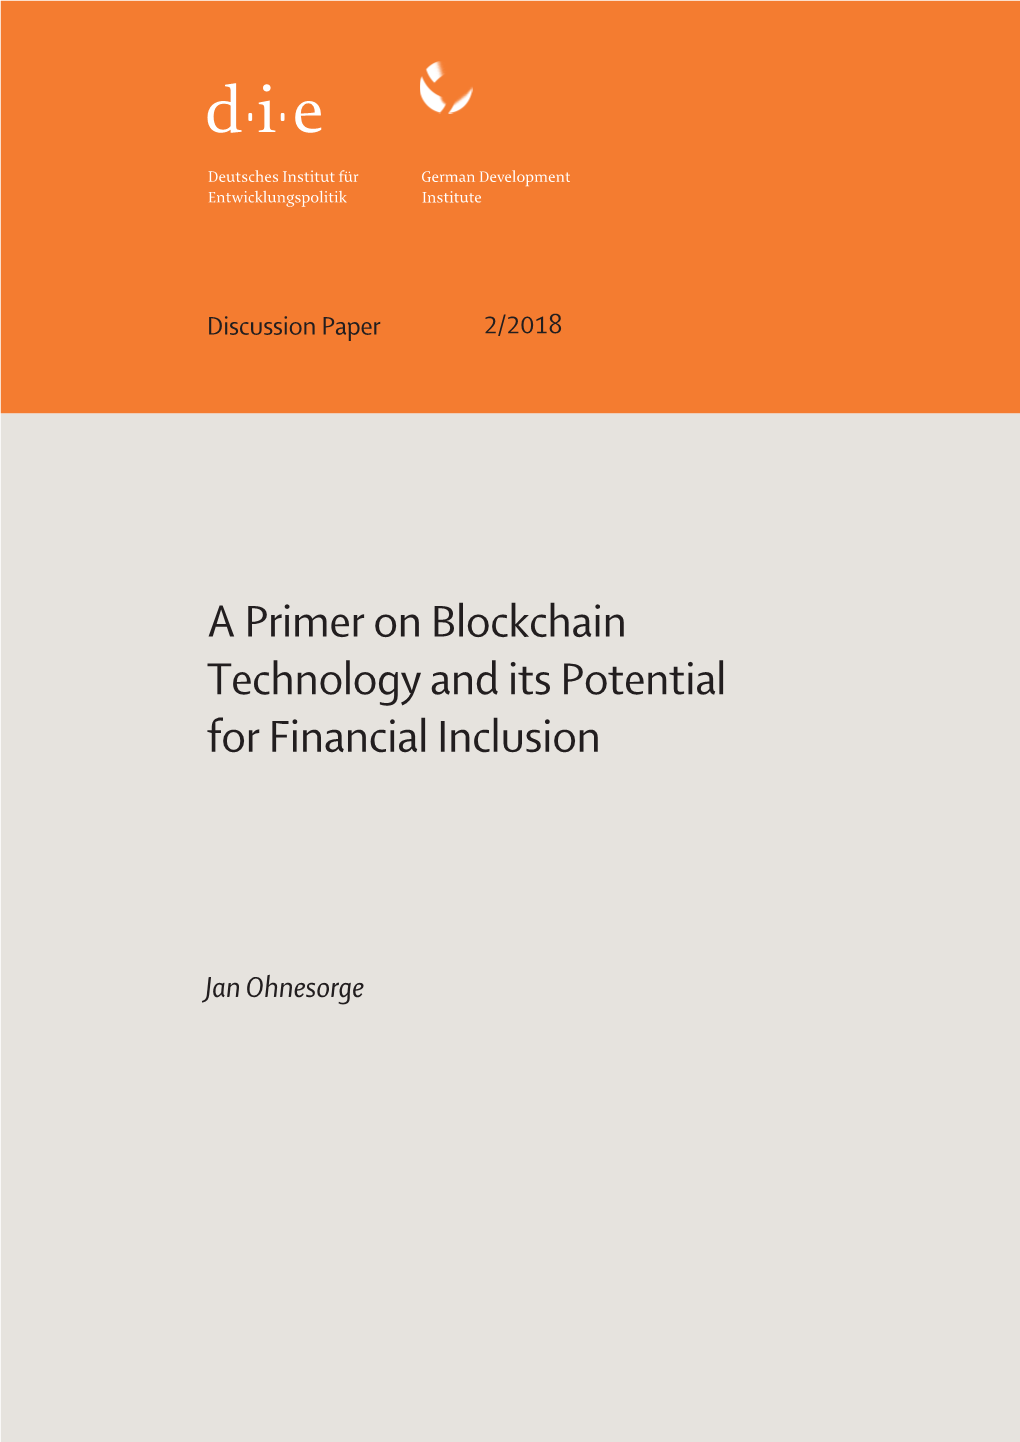 A Primer on Blockchain Technology and Its Potential for Financial Inclusion